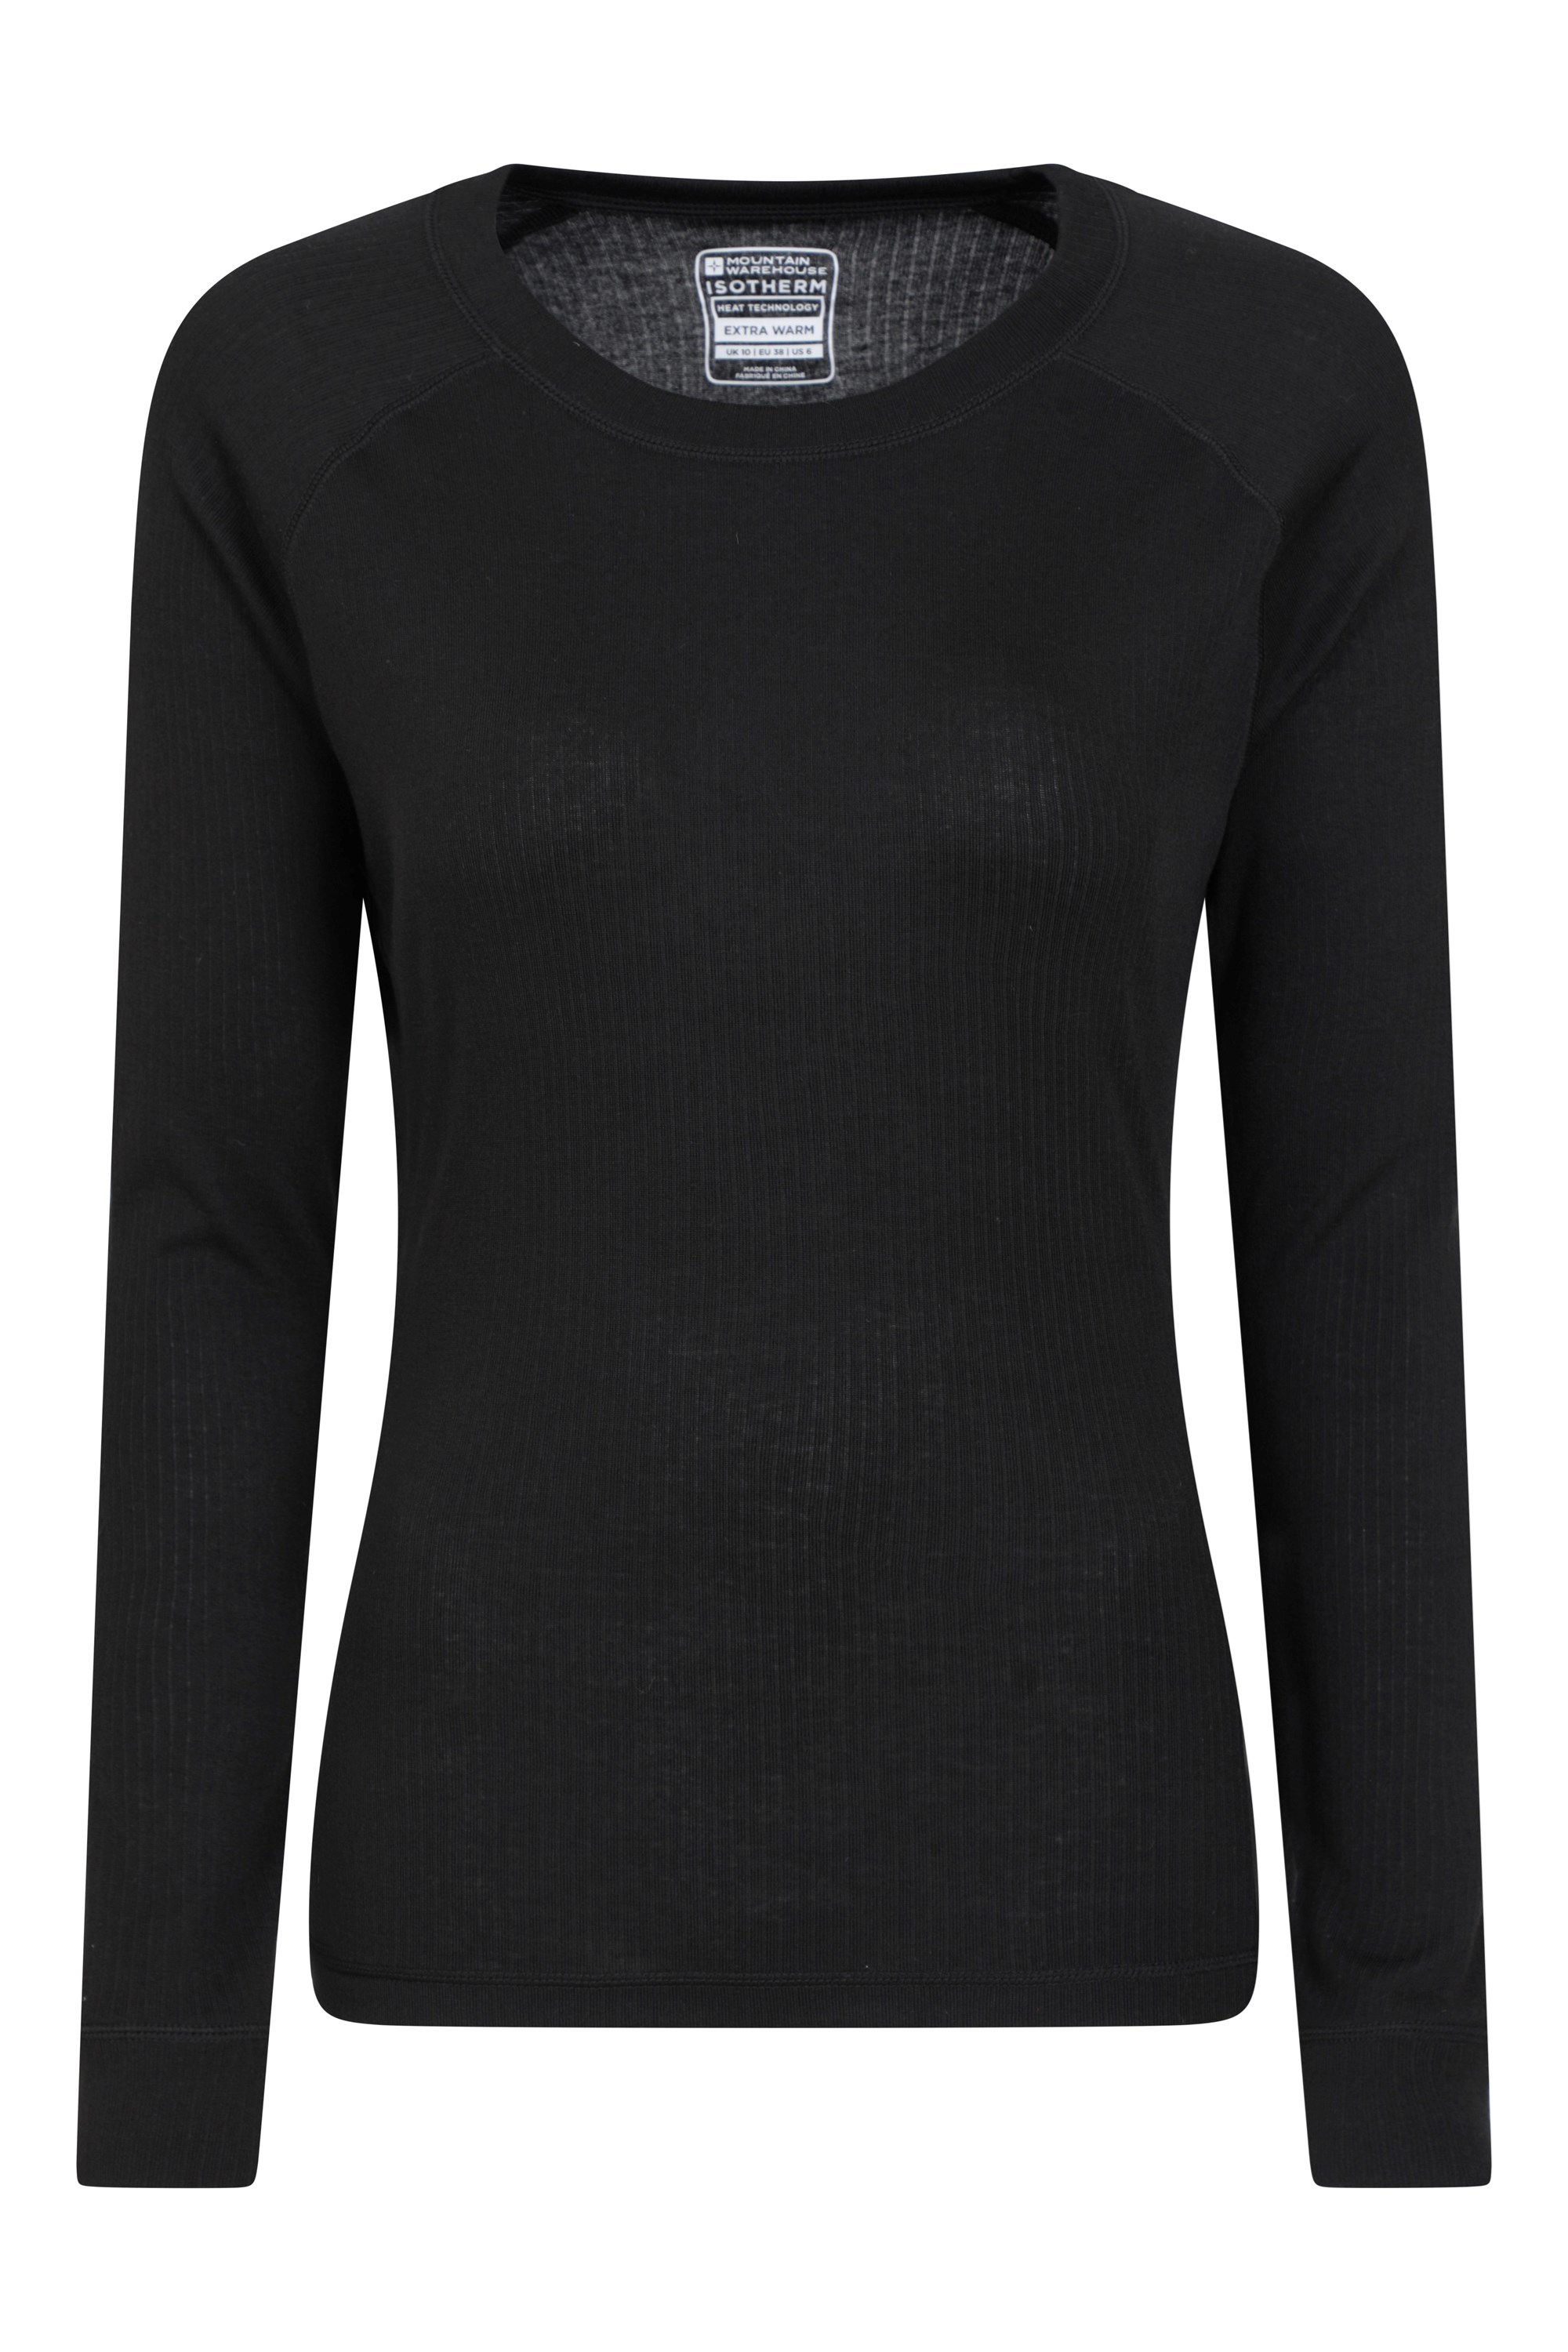 Talus Womens Long Sleeved Top | Mountain Warehouse GB